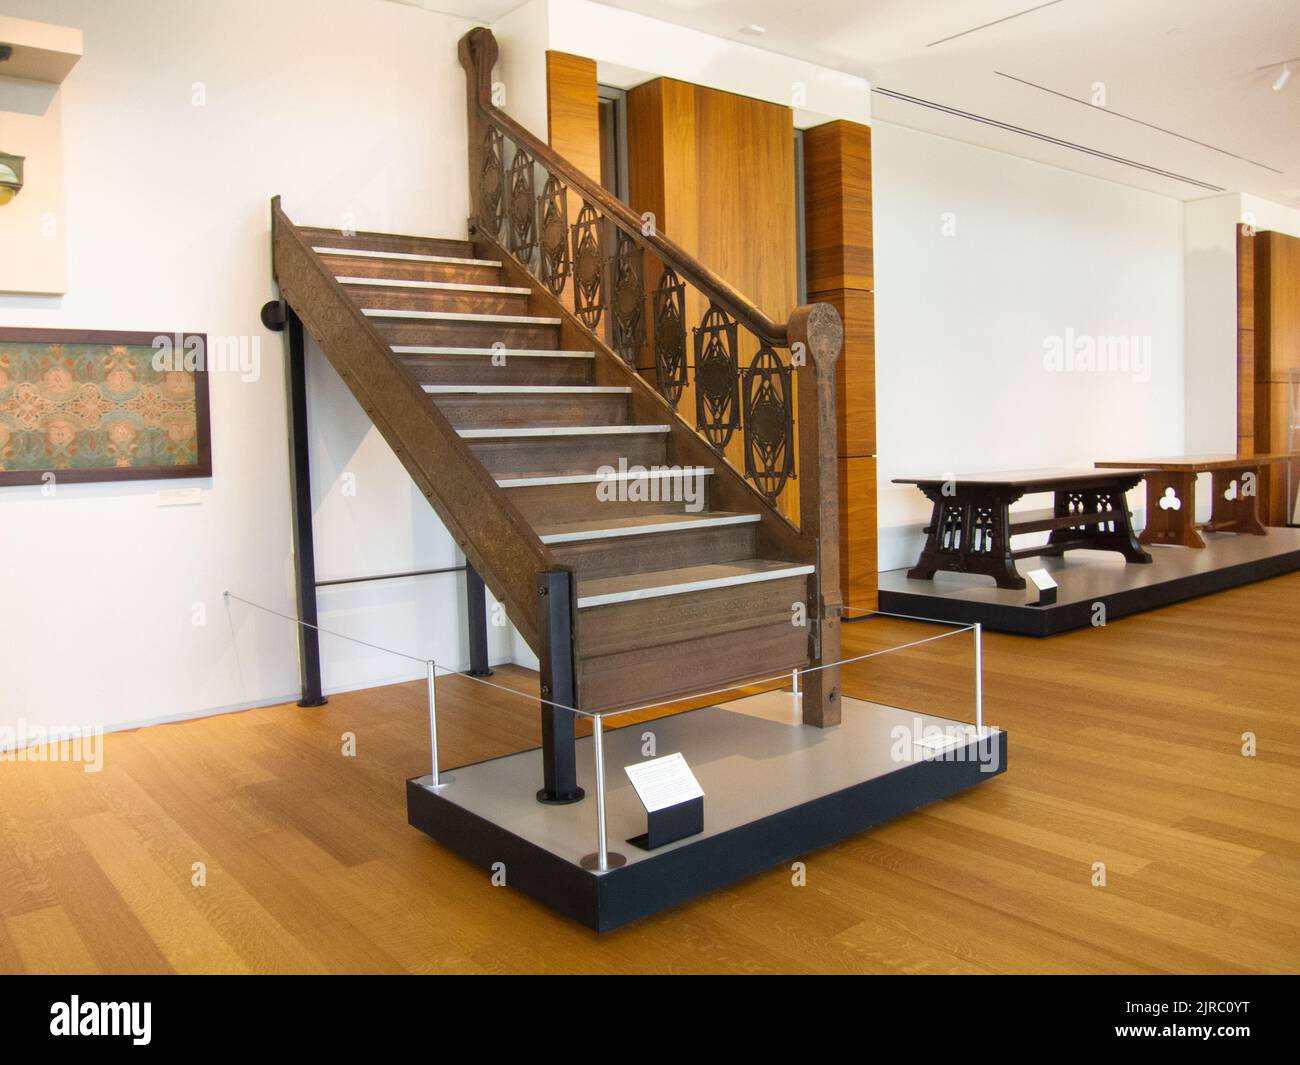 Museum of the American Arts & Crafts Movement, St. Petersburg, Florida.  Craftsman staircase from an early 1900s Chicago bank. Stock Photo